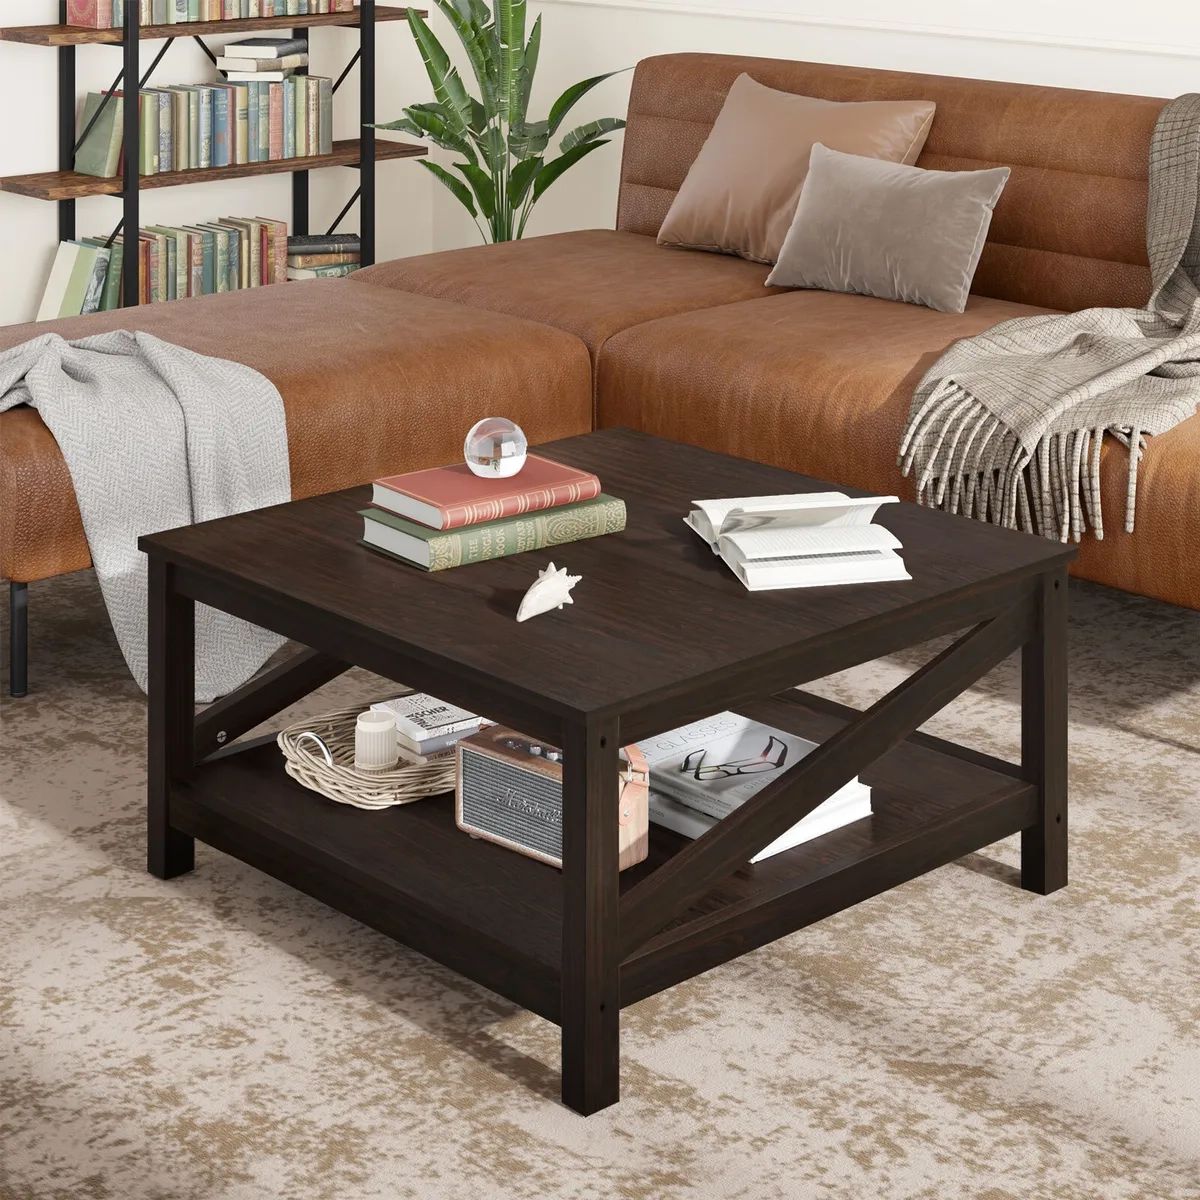 2 Tier Wood Square Coffee Table Farmhouse Cocktail Table With Storage  Shelves | Ebay Regarding Wood Coffee Tables With 2 Tier Storage (View 13 of 15)